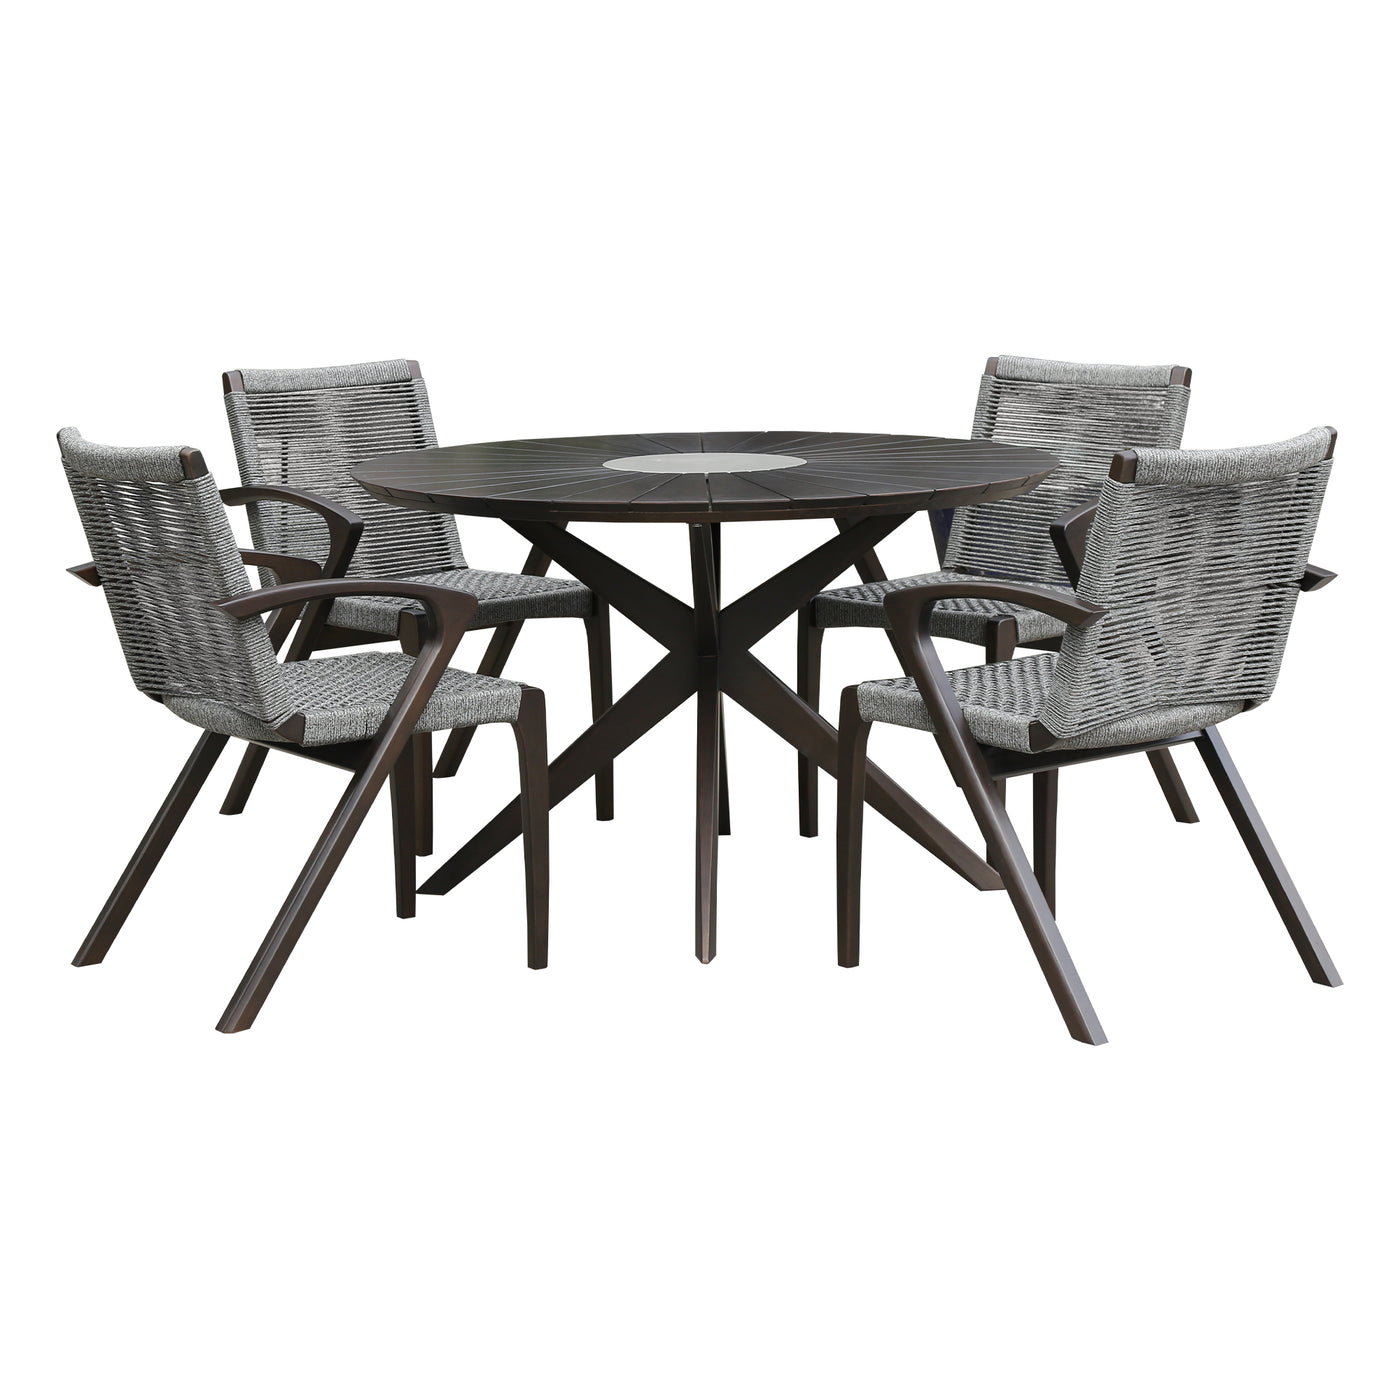 Oasis and Brielle Outdoor Dining Set